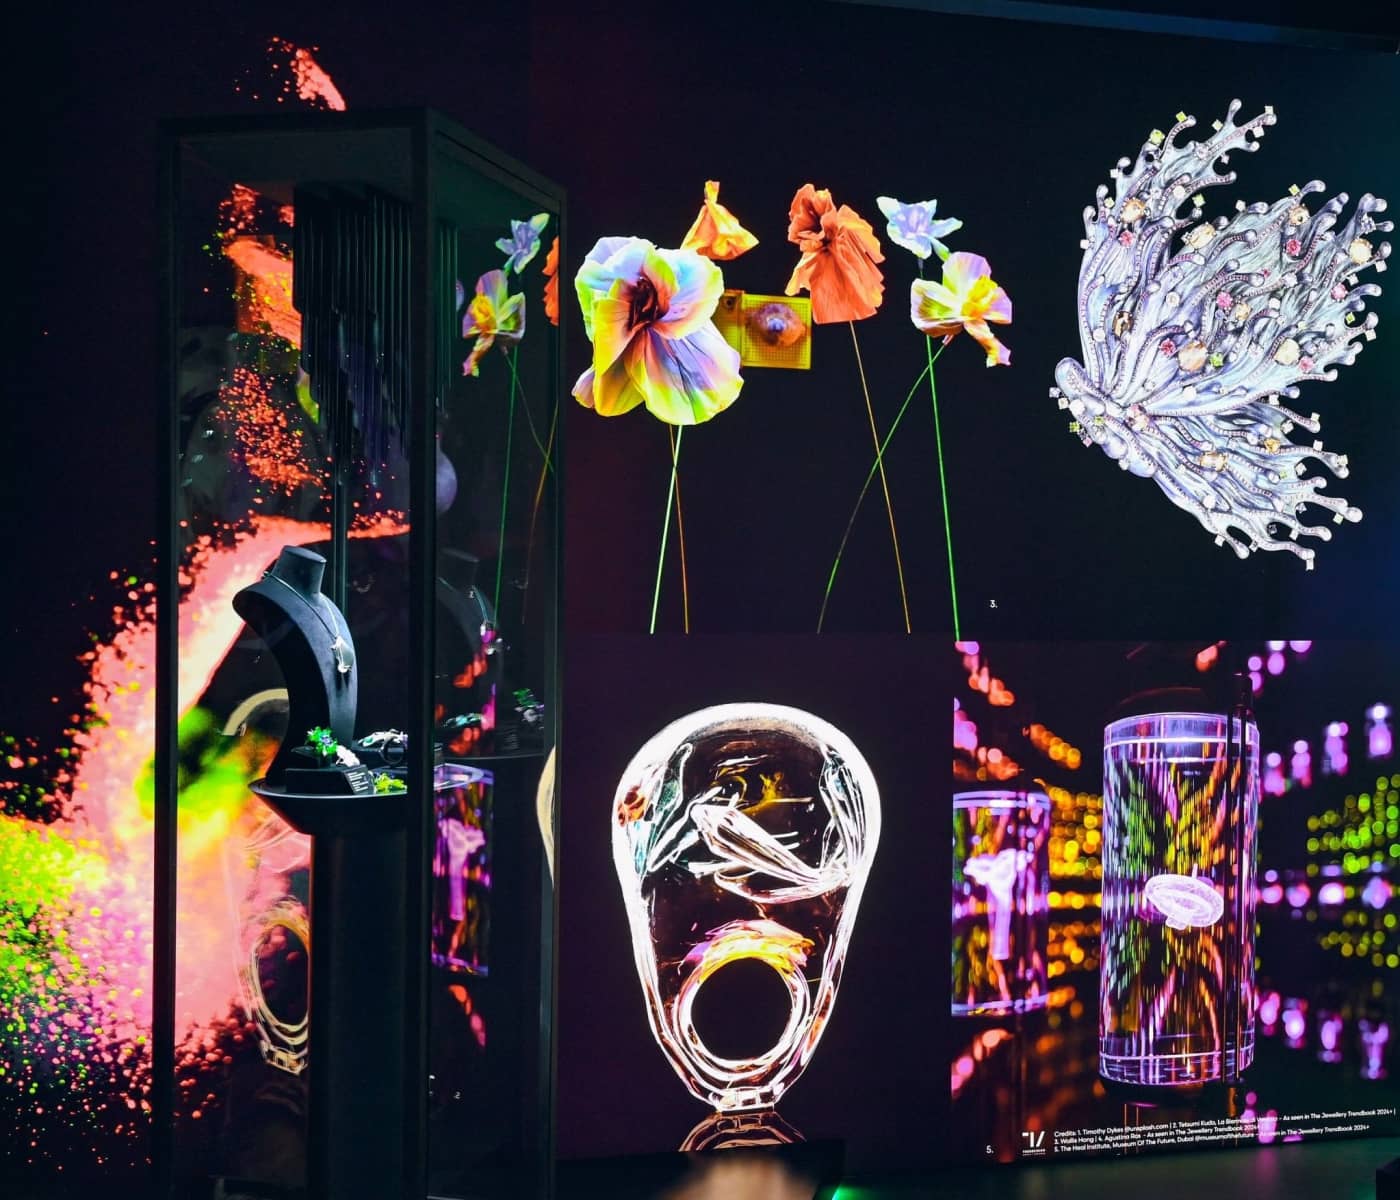 The Joy of Colour Exhibit in The Shenzhen Jewelry Museum in China